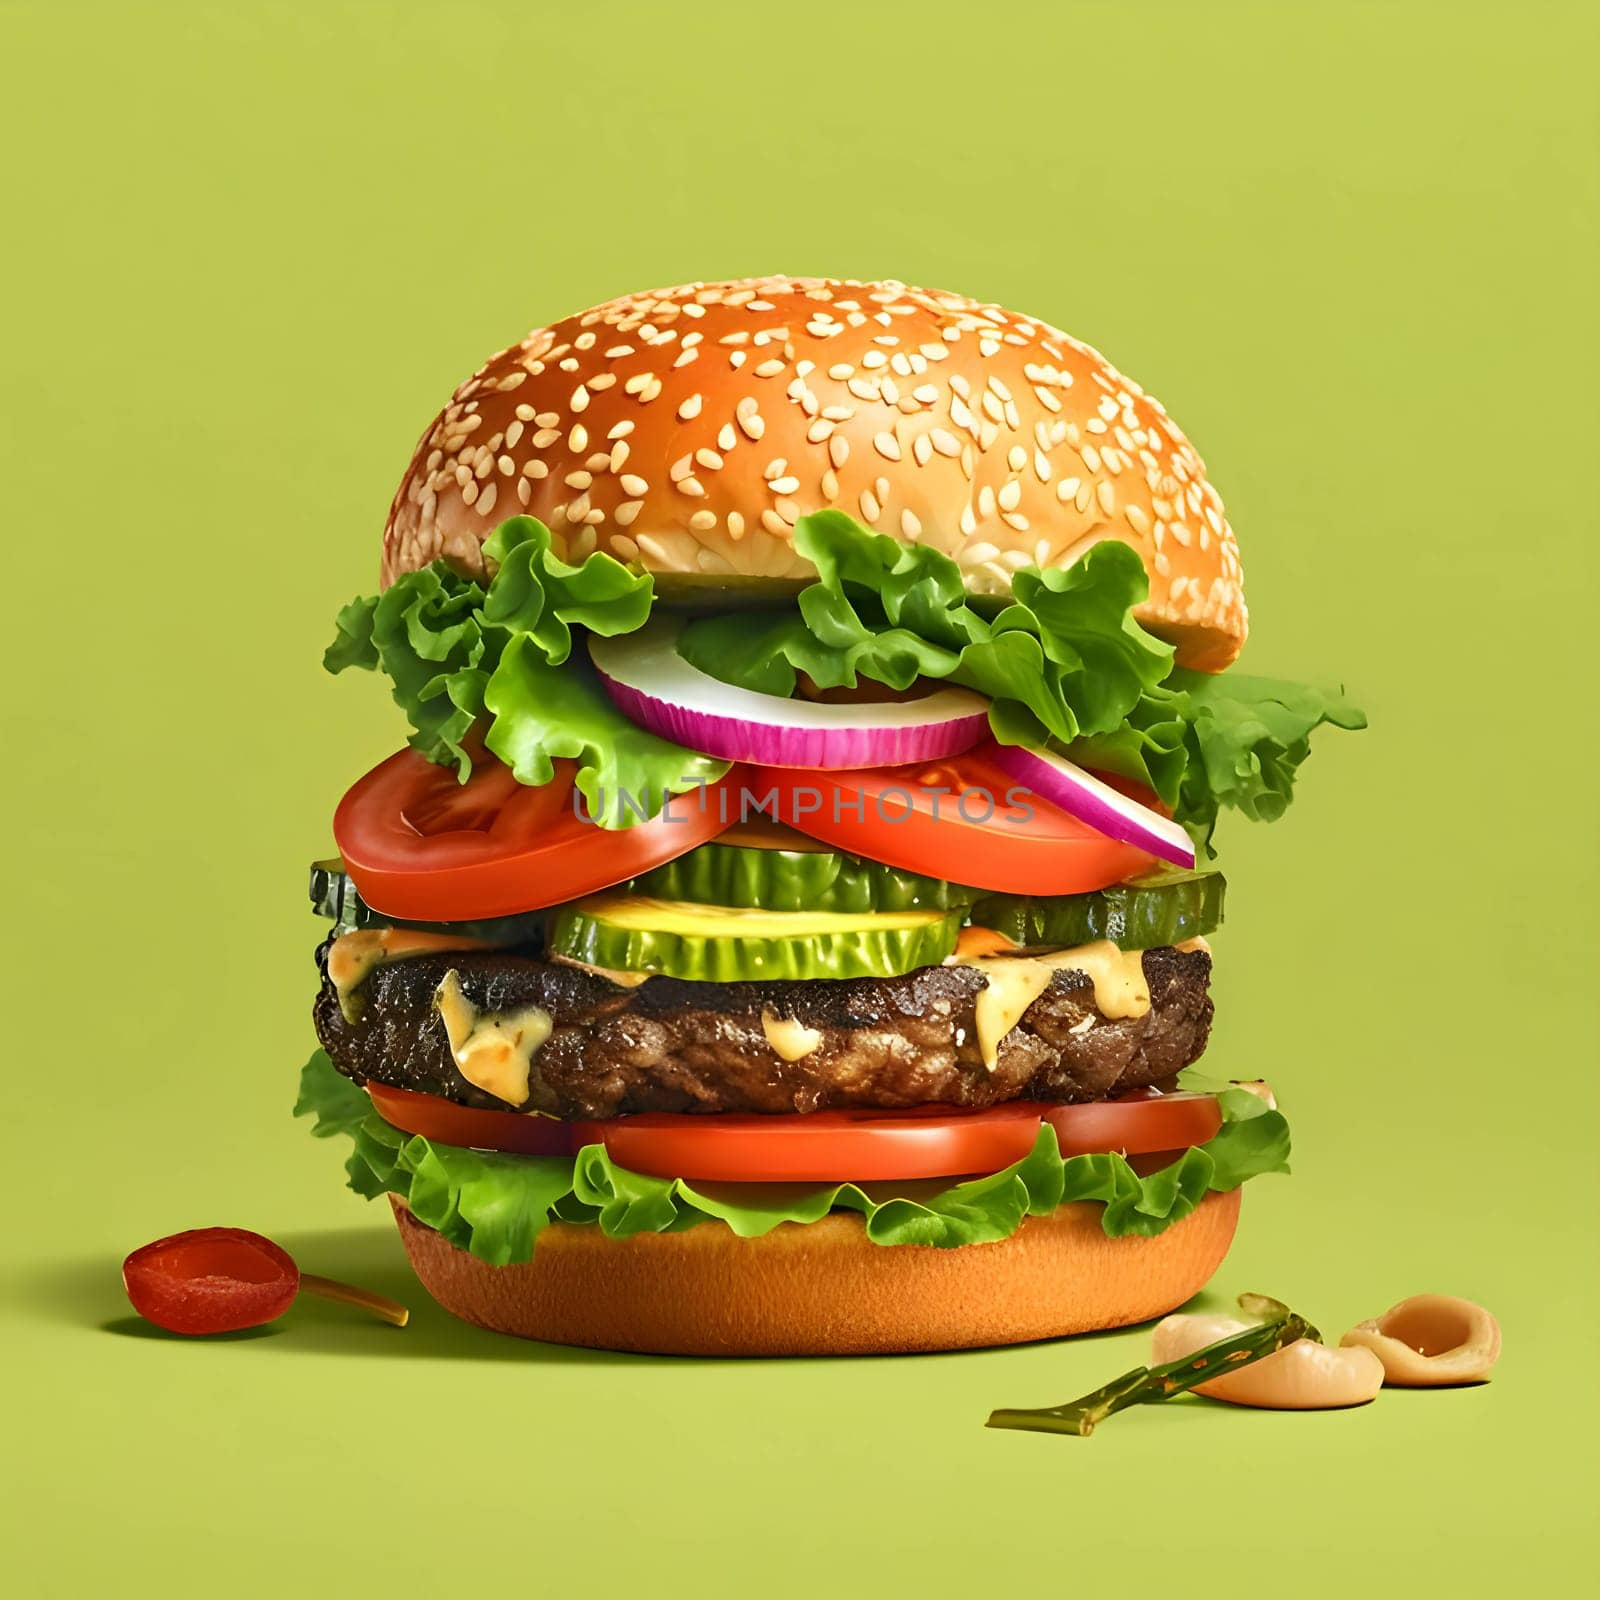 A sizable hamburger topped with fresh tomato, crisp cucumber, and leafy lettuce, set against a vibrant green background.